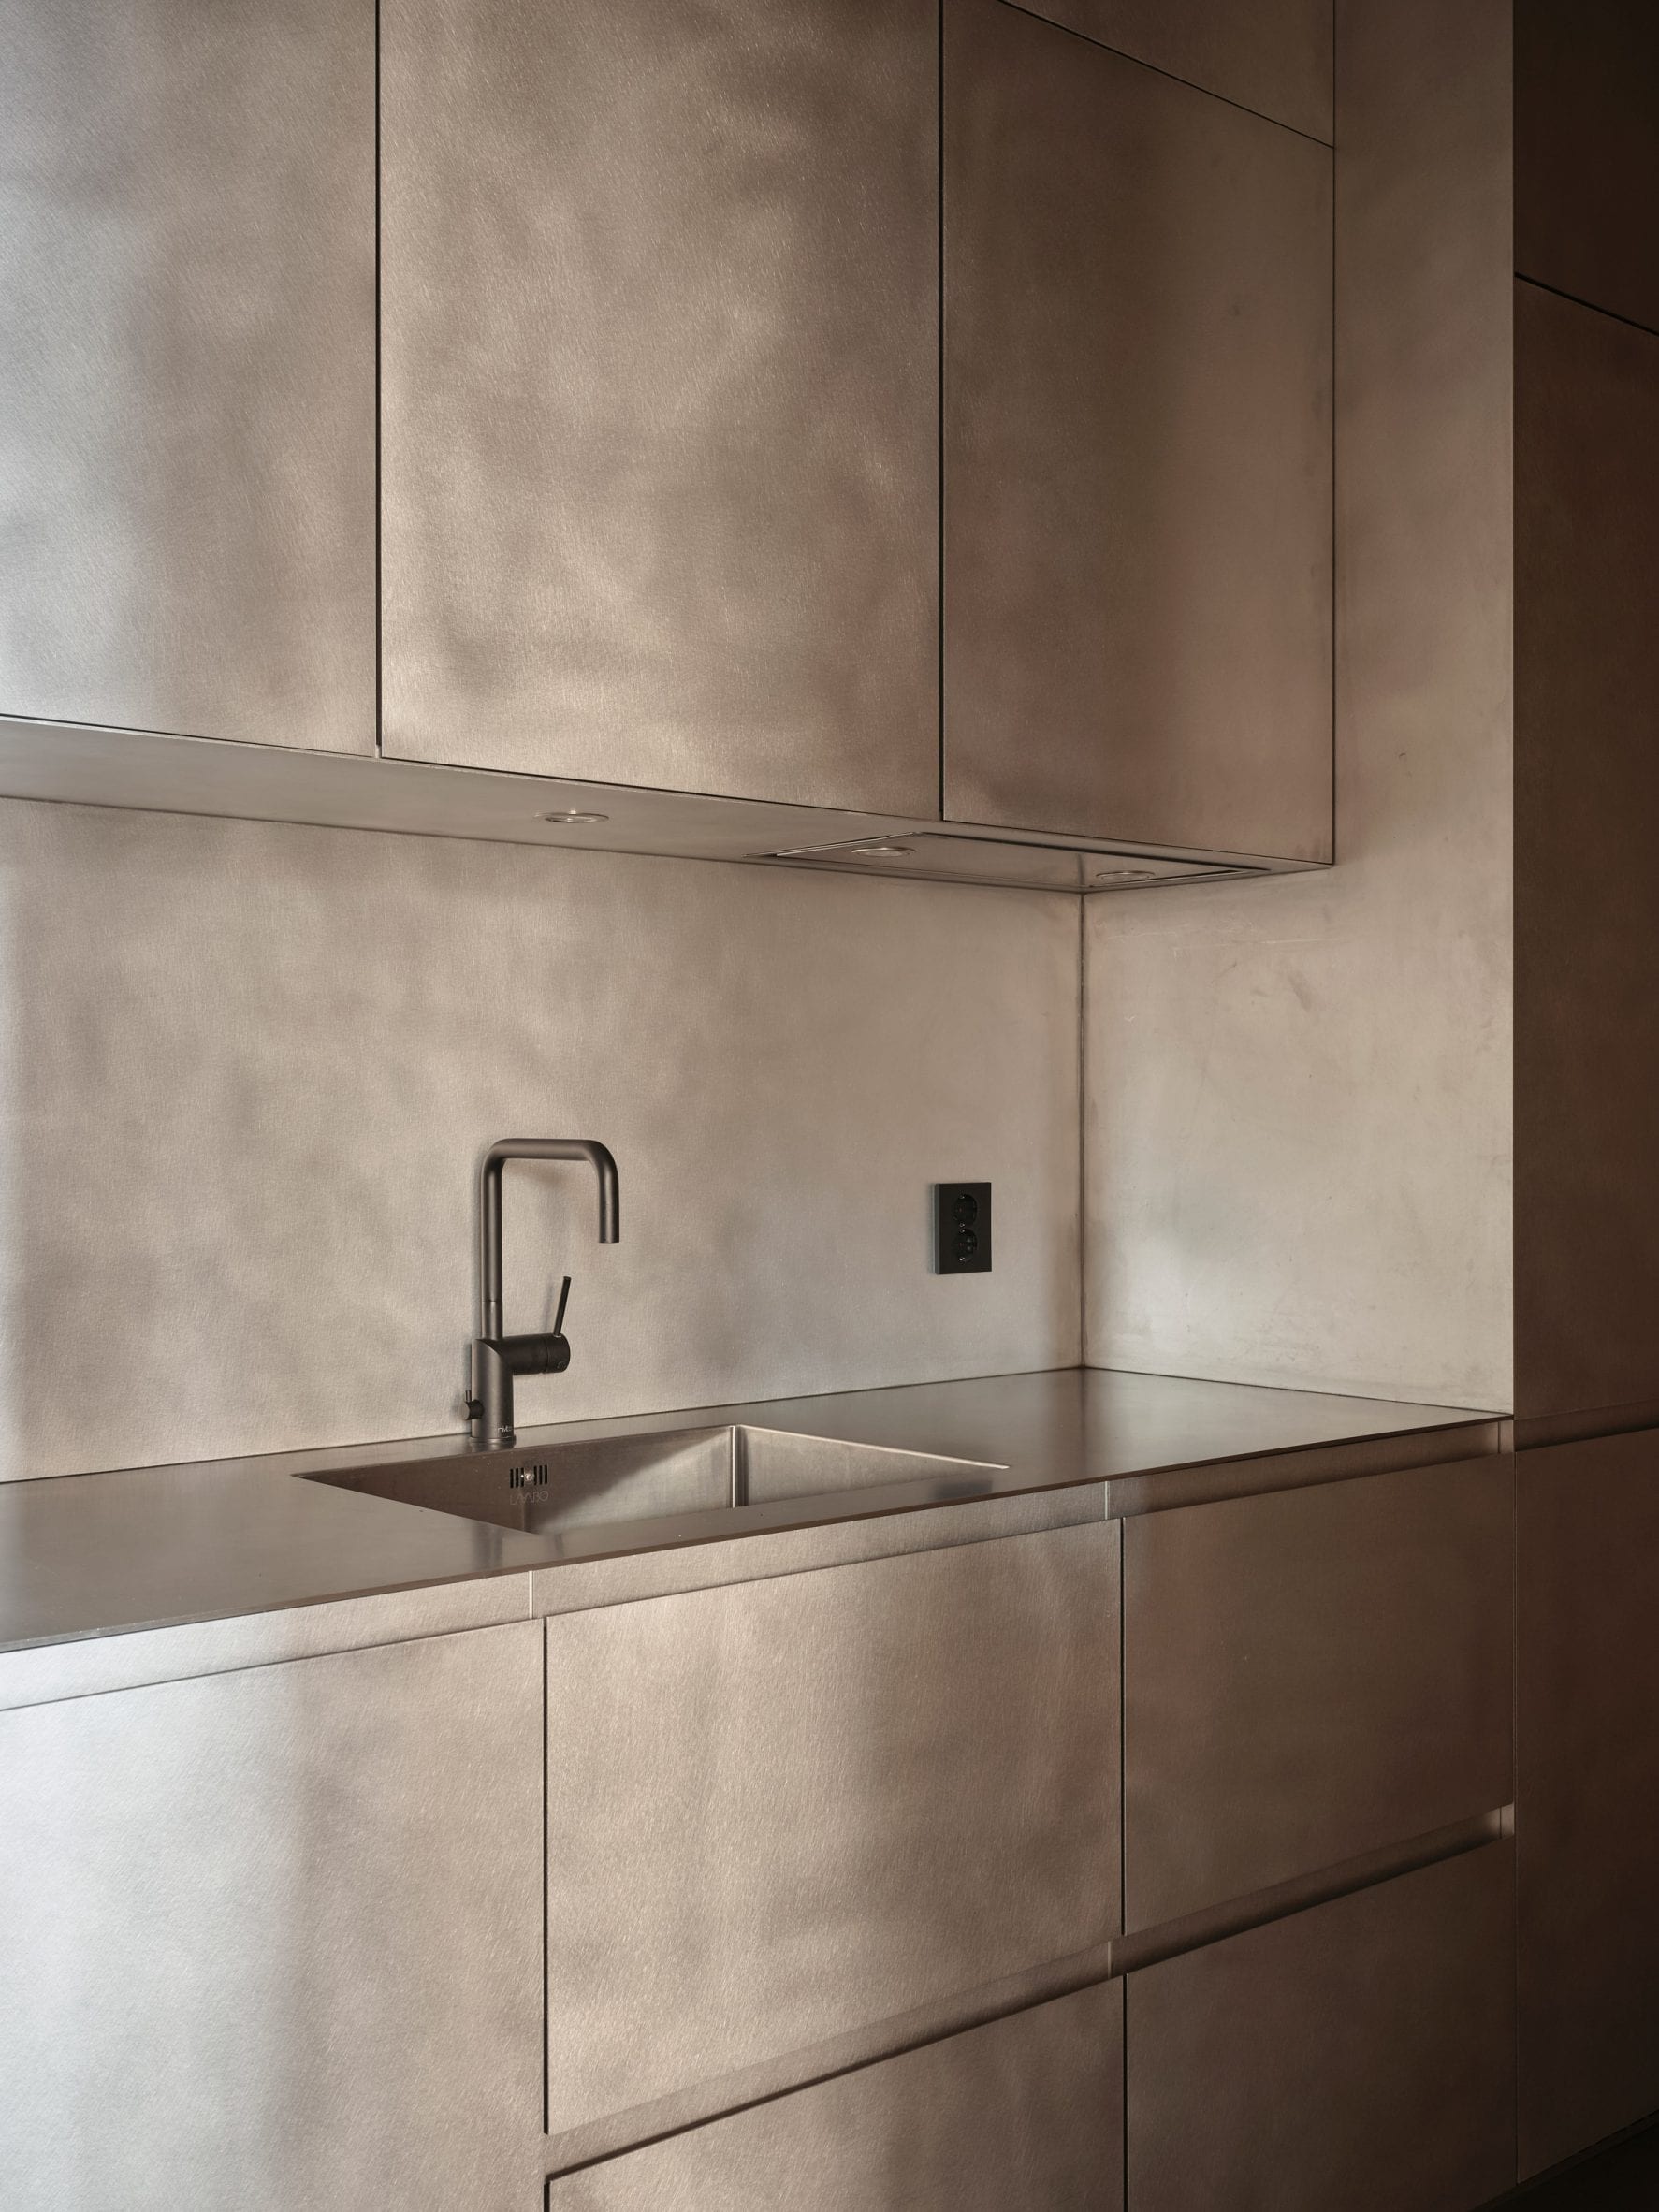 Cabinetry at samsen atelier was finished with a silver hue